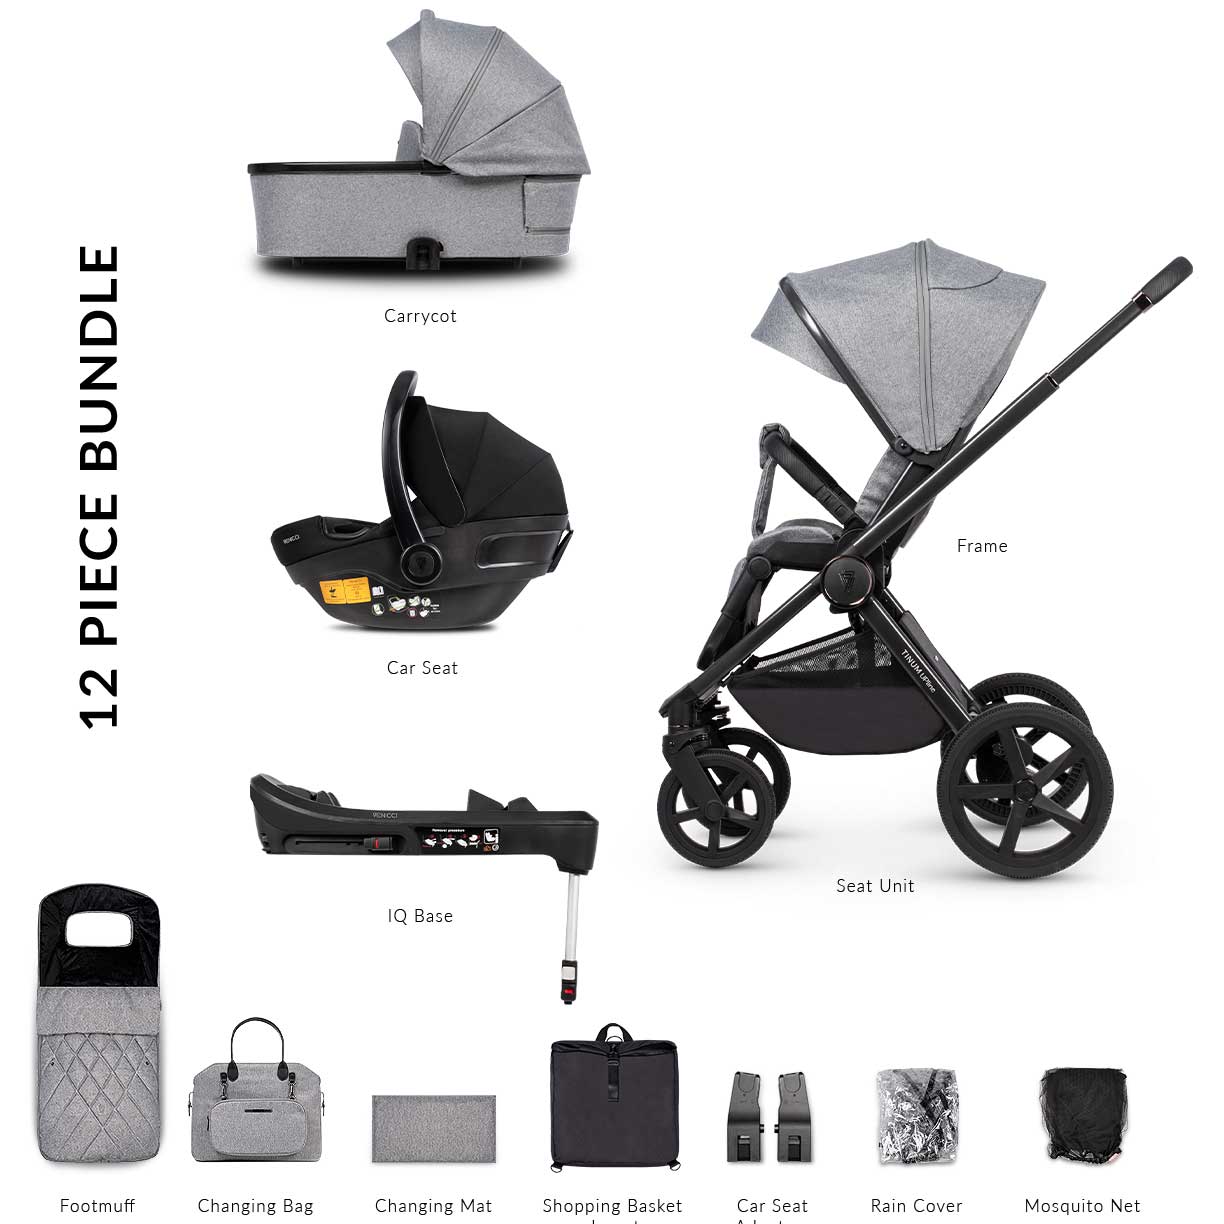 Venicci Tinum Upline Complete Travel System Bundle in Classic Grey Travel Systems 2000210405 5905261331632